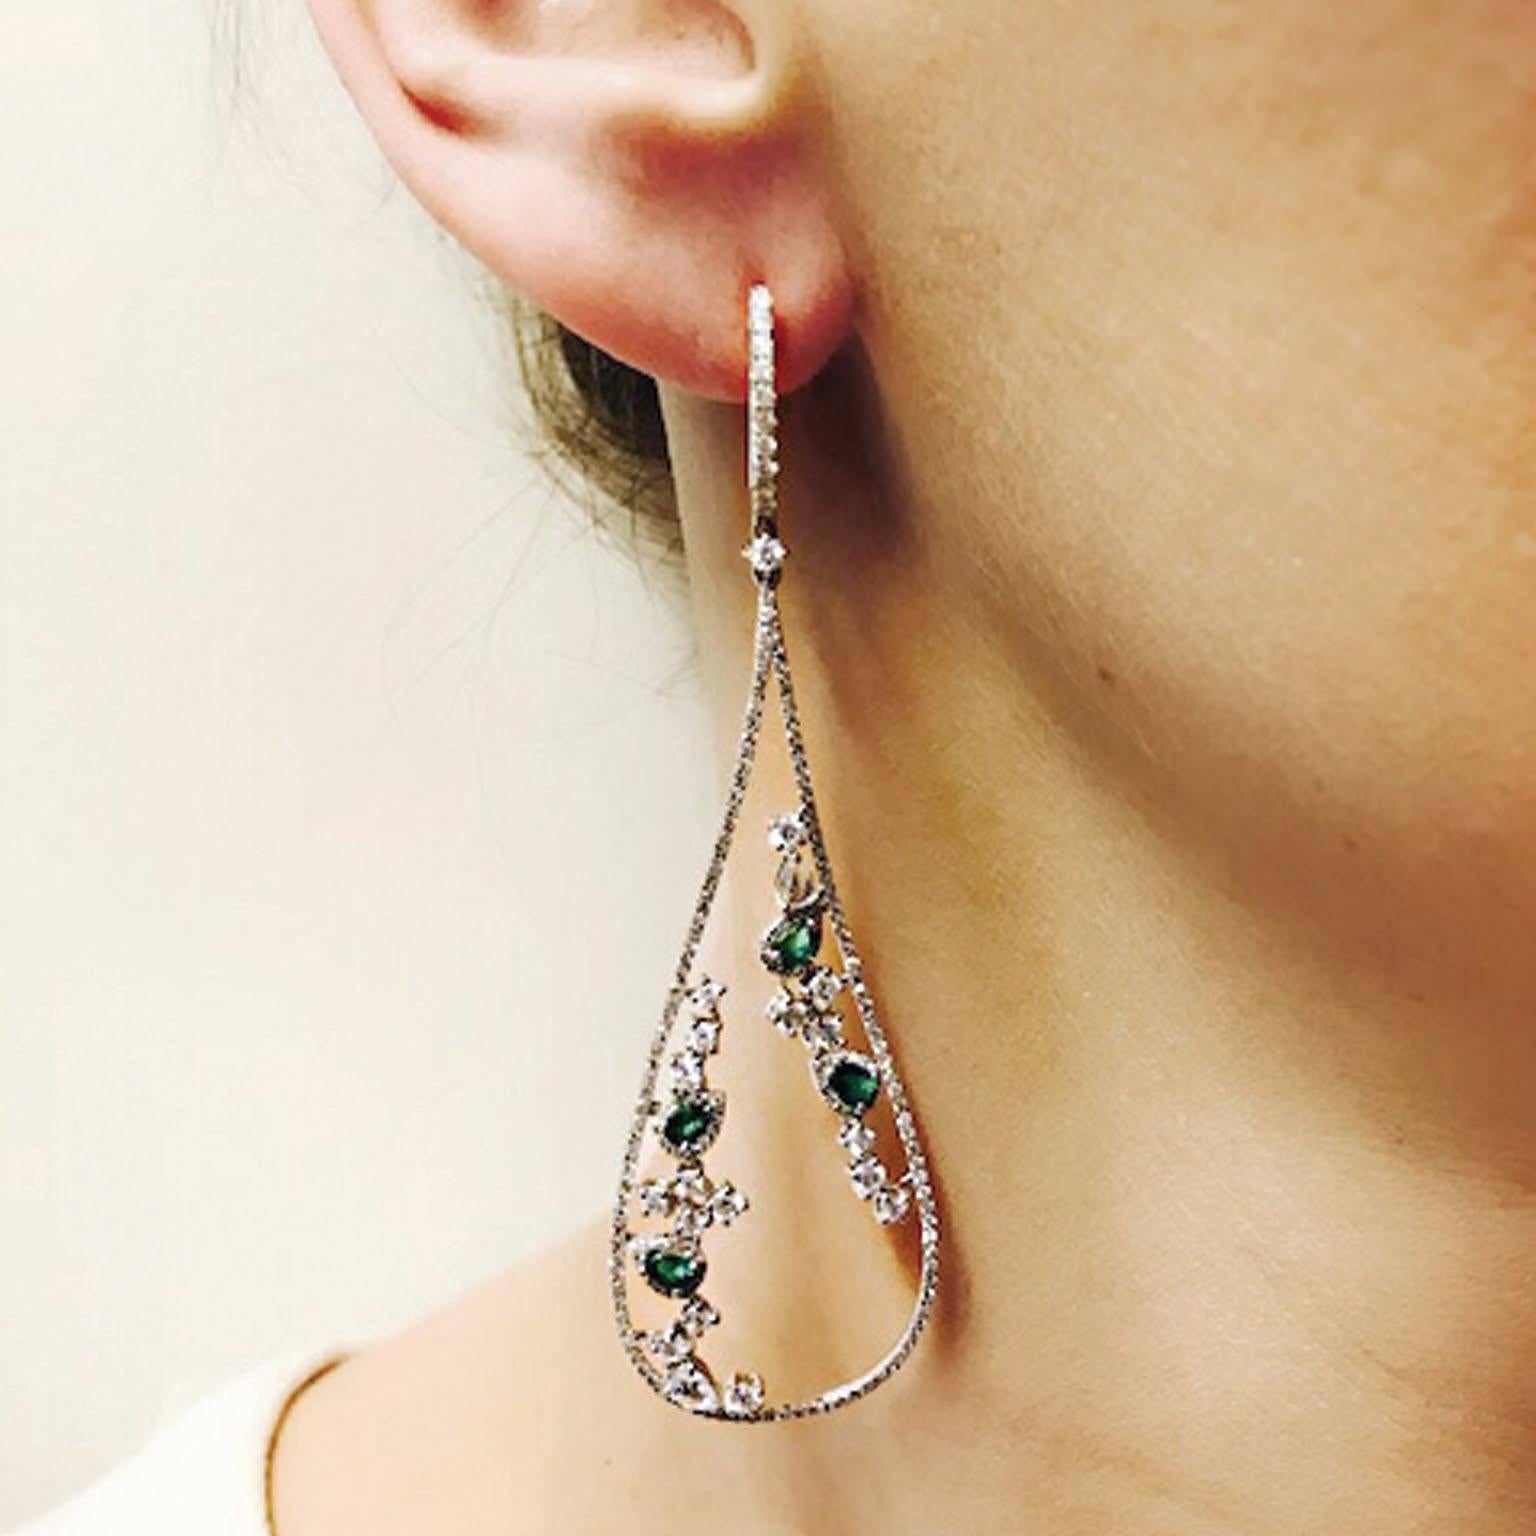 This delicate Emerald and Diamond loop earring contains approx .80ct of Emeralds and approx. 3ct of Diamonds.  Lever back earring. 

79mm in Length